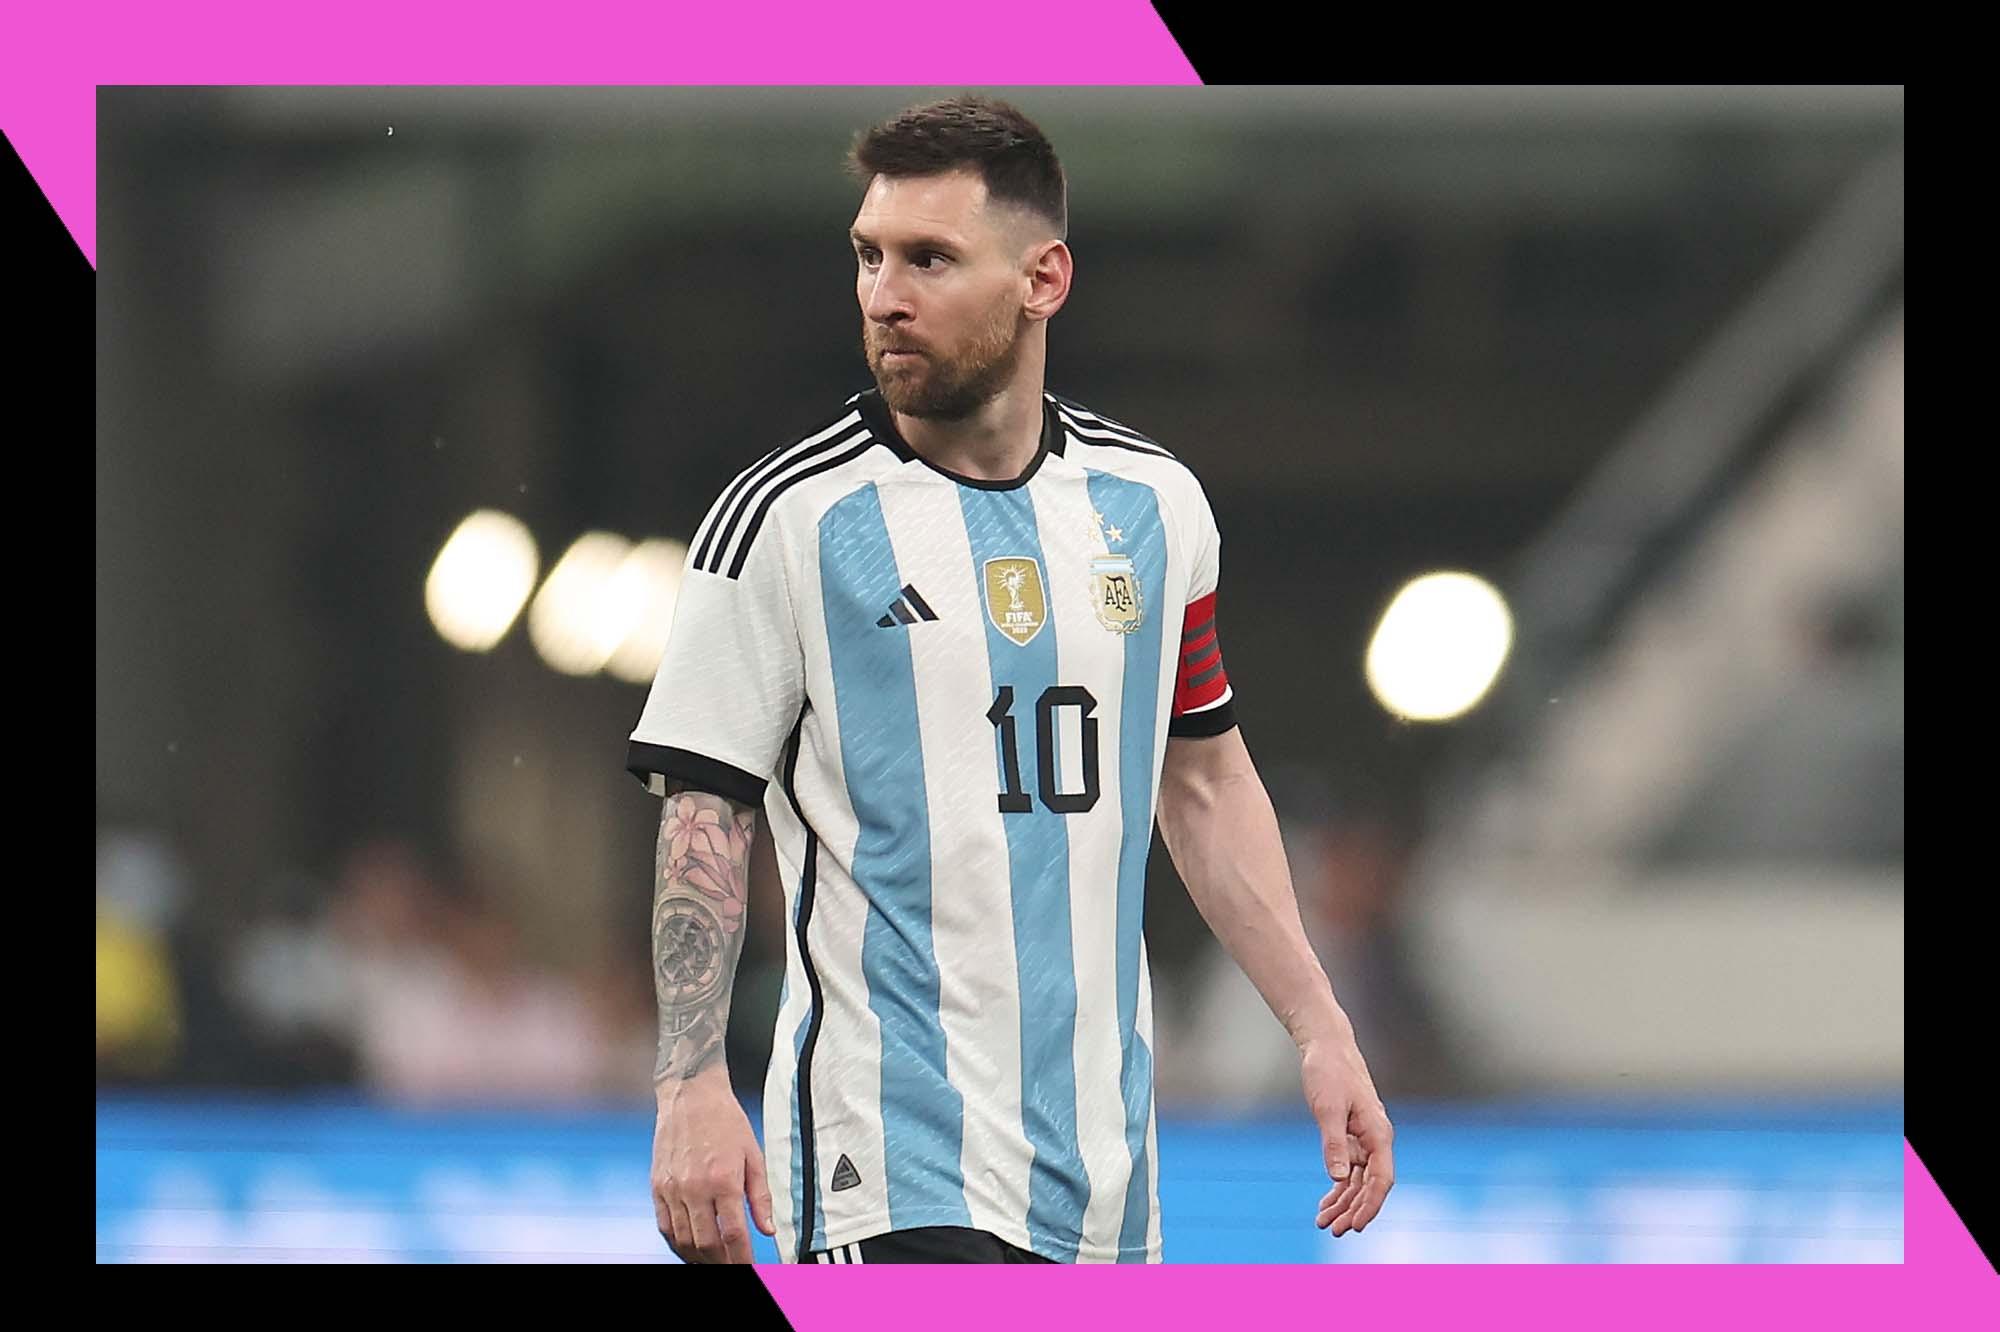 Messi Mls Debut Tickets Prices Are Dropping How To Buy Now